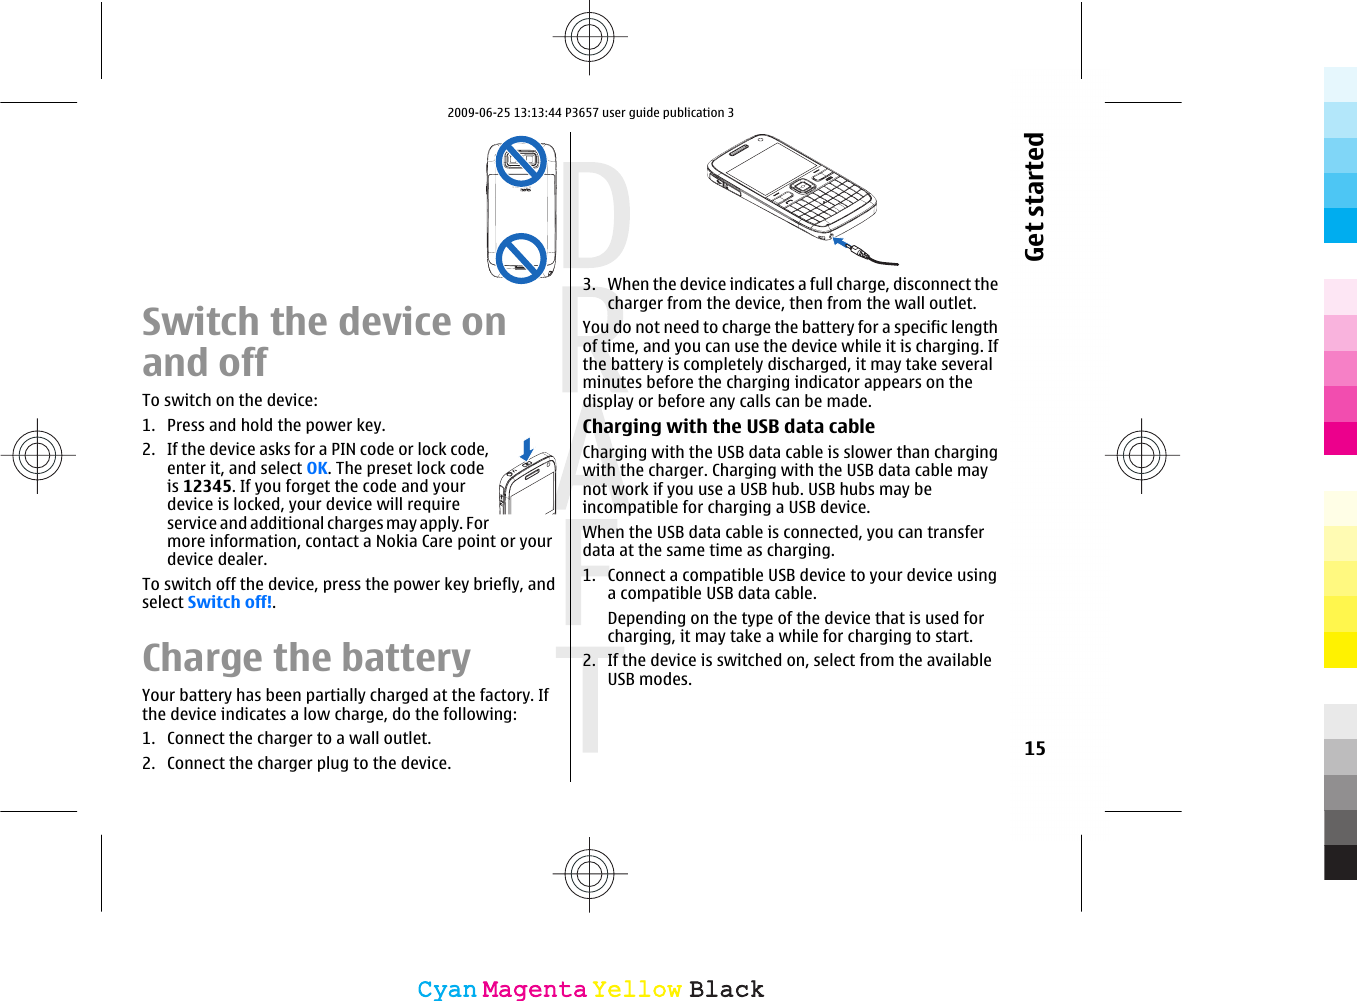 Switch the device onand offTo switch on the device:1. Press and hold the power key.2. If the device asks for a PIN code or lock code,enter it, and select OK. The preset lock codeis 12345. If you forget the code and yourdevice is locked, your device will requireservice and additional charges may apply. Formore information, contact a Nokia Care point or yourdevice dealer.To switch off the device, press the power key briefly, andselect Switch off!.Charge the batteryYour battery has been partially charged at the factory. Ifthe device indicates a low charge, do the following:1. Connect the charger to a wall outlet.2. Connect the charger plug to the device.3. When the device indicates a full charge, disconnect thecharger from the device, then from the wall outlet.You do not need to charge the battery for a specific lengthof time, and you can use the device while it is charging. Ifthe battery is completely discharged, it may take severalminutes before the charging indicator appears on thedisplay or before any calls can be made.Charging with the USB data cableCharging with the USB data cable is slower than chargingwith the charger. Charging with the USB data cable maynot work if you use a USB hub. USB hubs may beincompatible for charging a USB device.When the USB data cable is connected, you can transferdata at the same time as charging.1. Connect a compatible USB device to your device usinga compatible USB data cable.Depending on the type of the device that is used forcharging, it may take a while for charging to start.2. If the device is switched on, select from the availableUSB modes.15Get startedCyanCyanMagentaMagentaYellowYellowBlackBlack2009-06-25 13:13:44 P3657 user guide publication 3